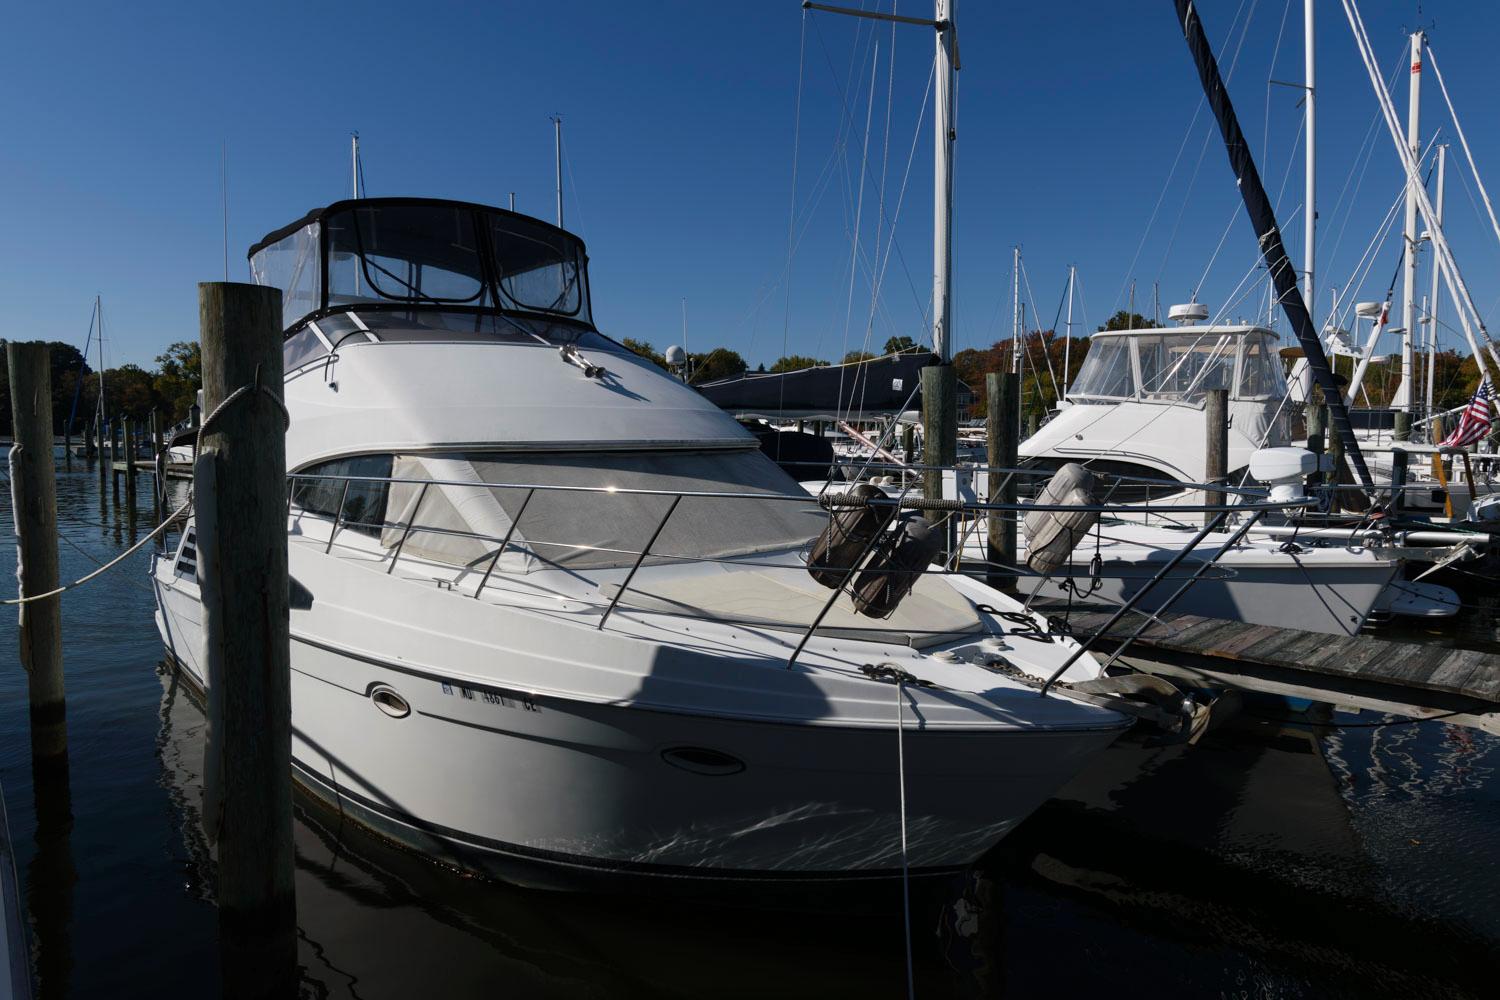 M 7399 RD Knot 10 Yacht Sales